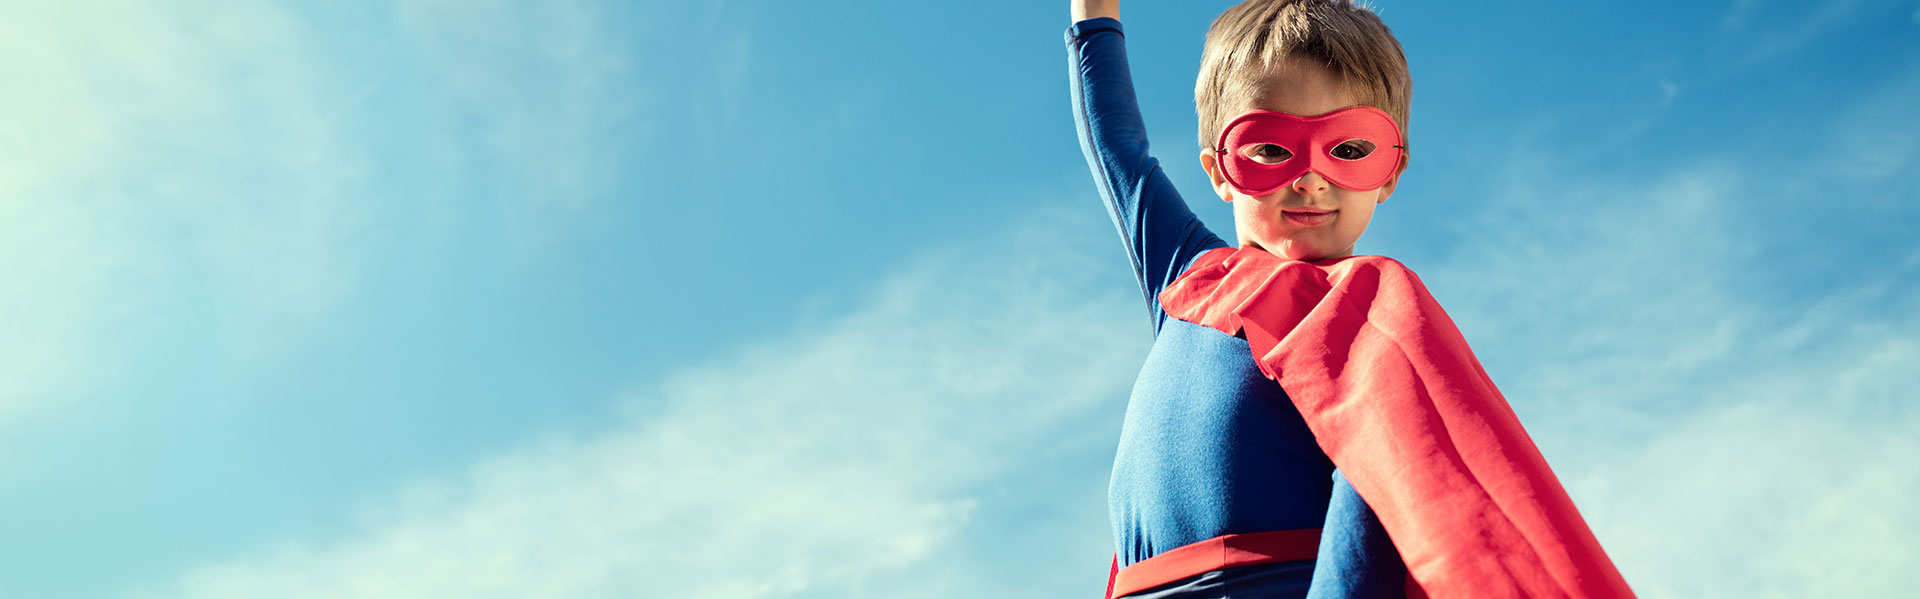 Child wearing superhero costume in front of a blue sky